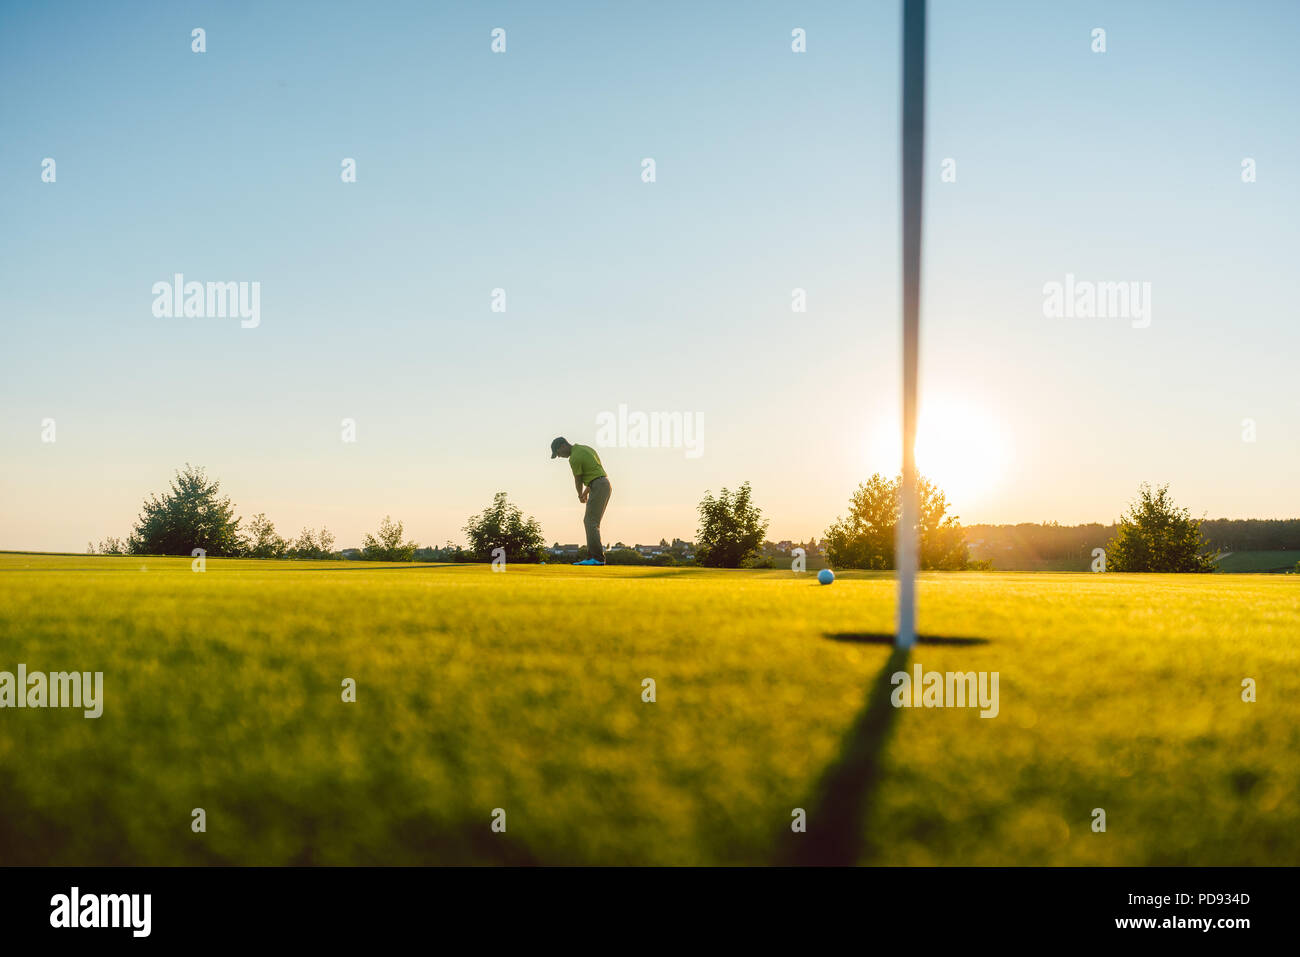 Silhouette of a male player hitting a long shot on the golf course Stock Photo